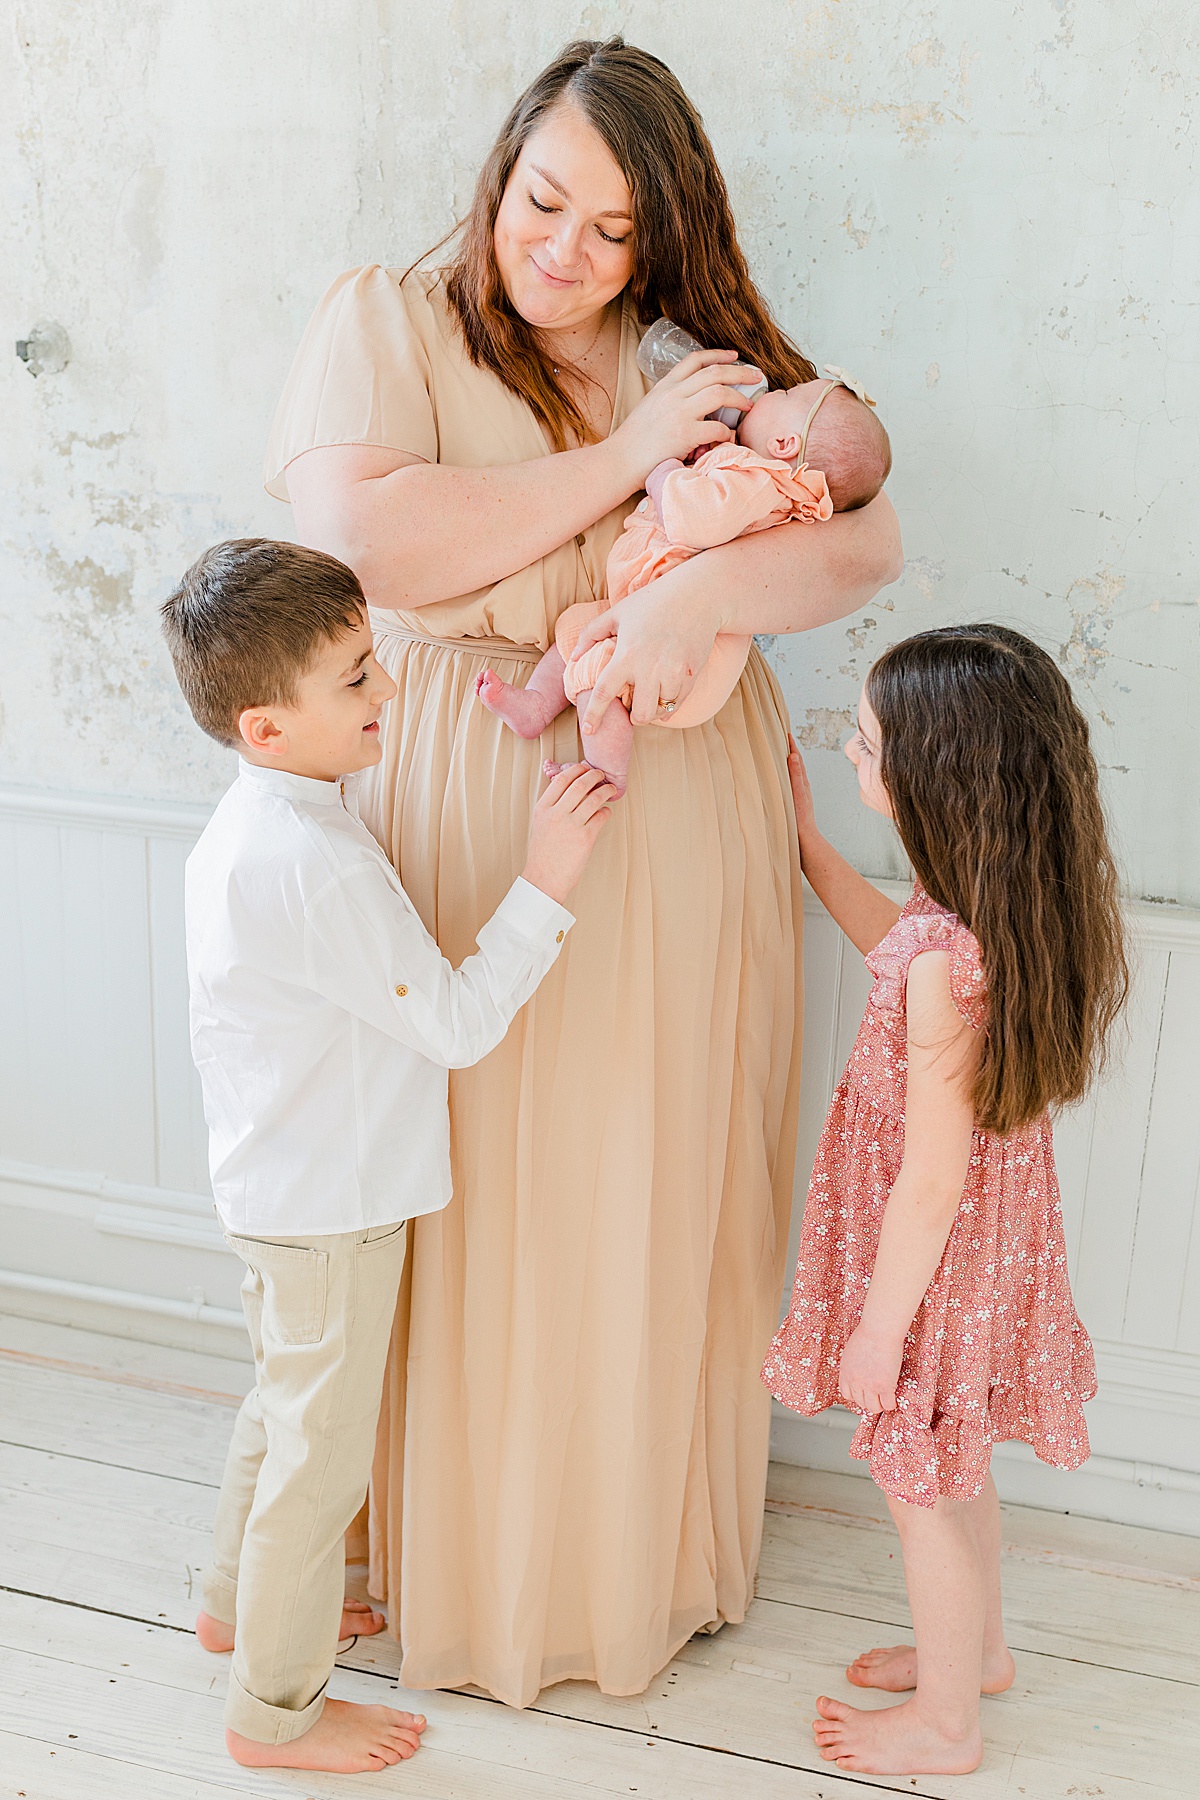 Newborn Photography in the North Shore | Mother in long neutral dress standing and feeding a newborn baby a bottle while brother tickles baby's feet and sister looks on